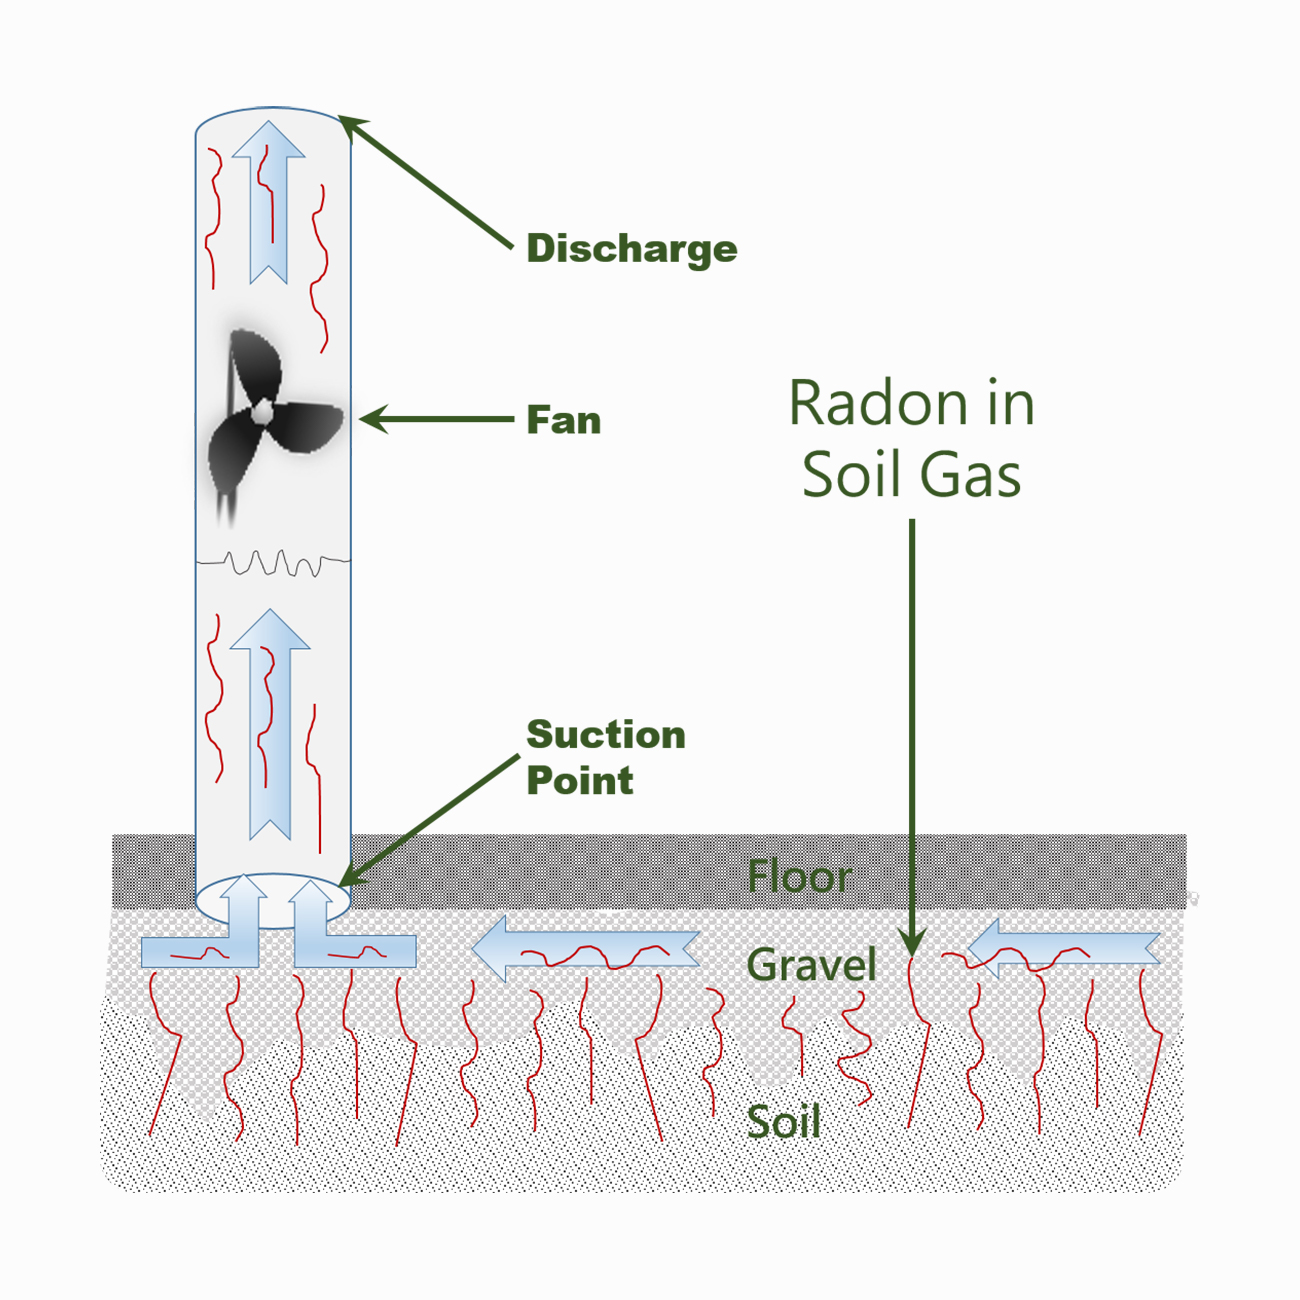 Six Added Benefits to Installing a Radon Reduction System